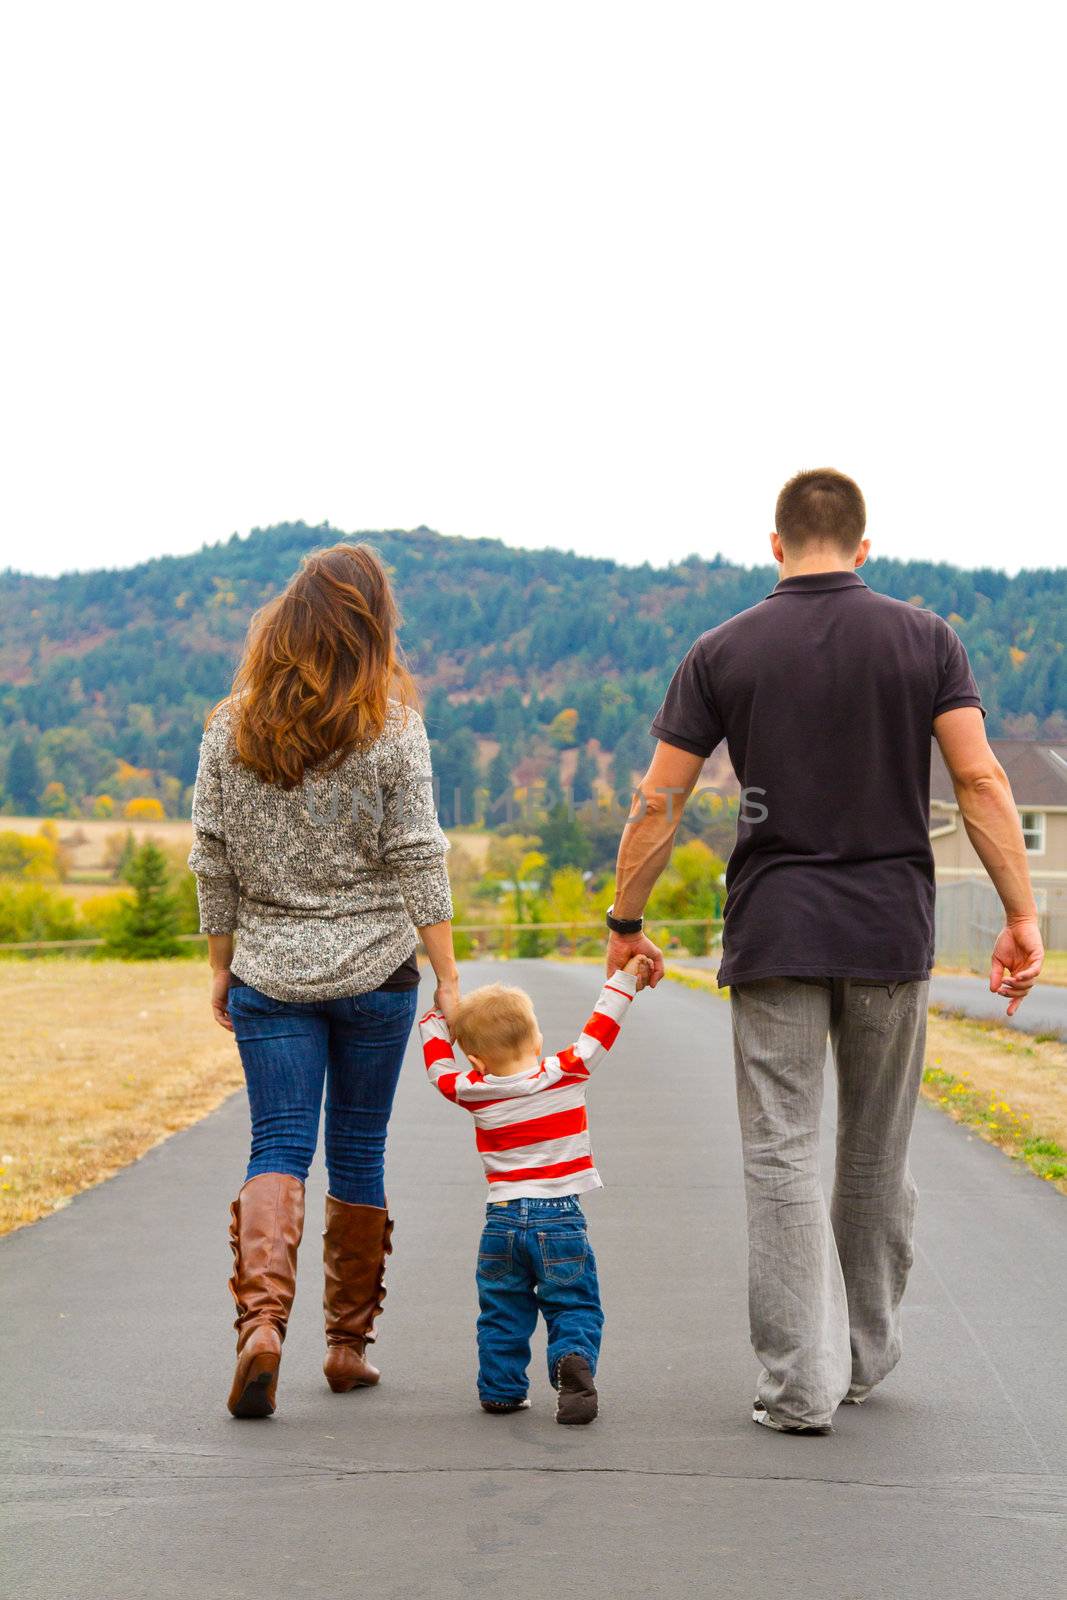 A family walks away on a path while holding hands with the child in the middle.